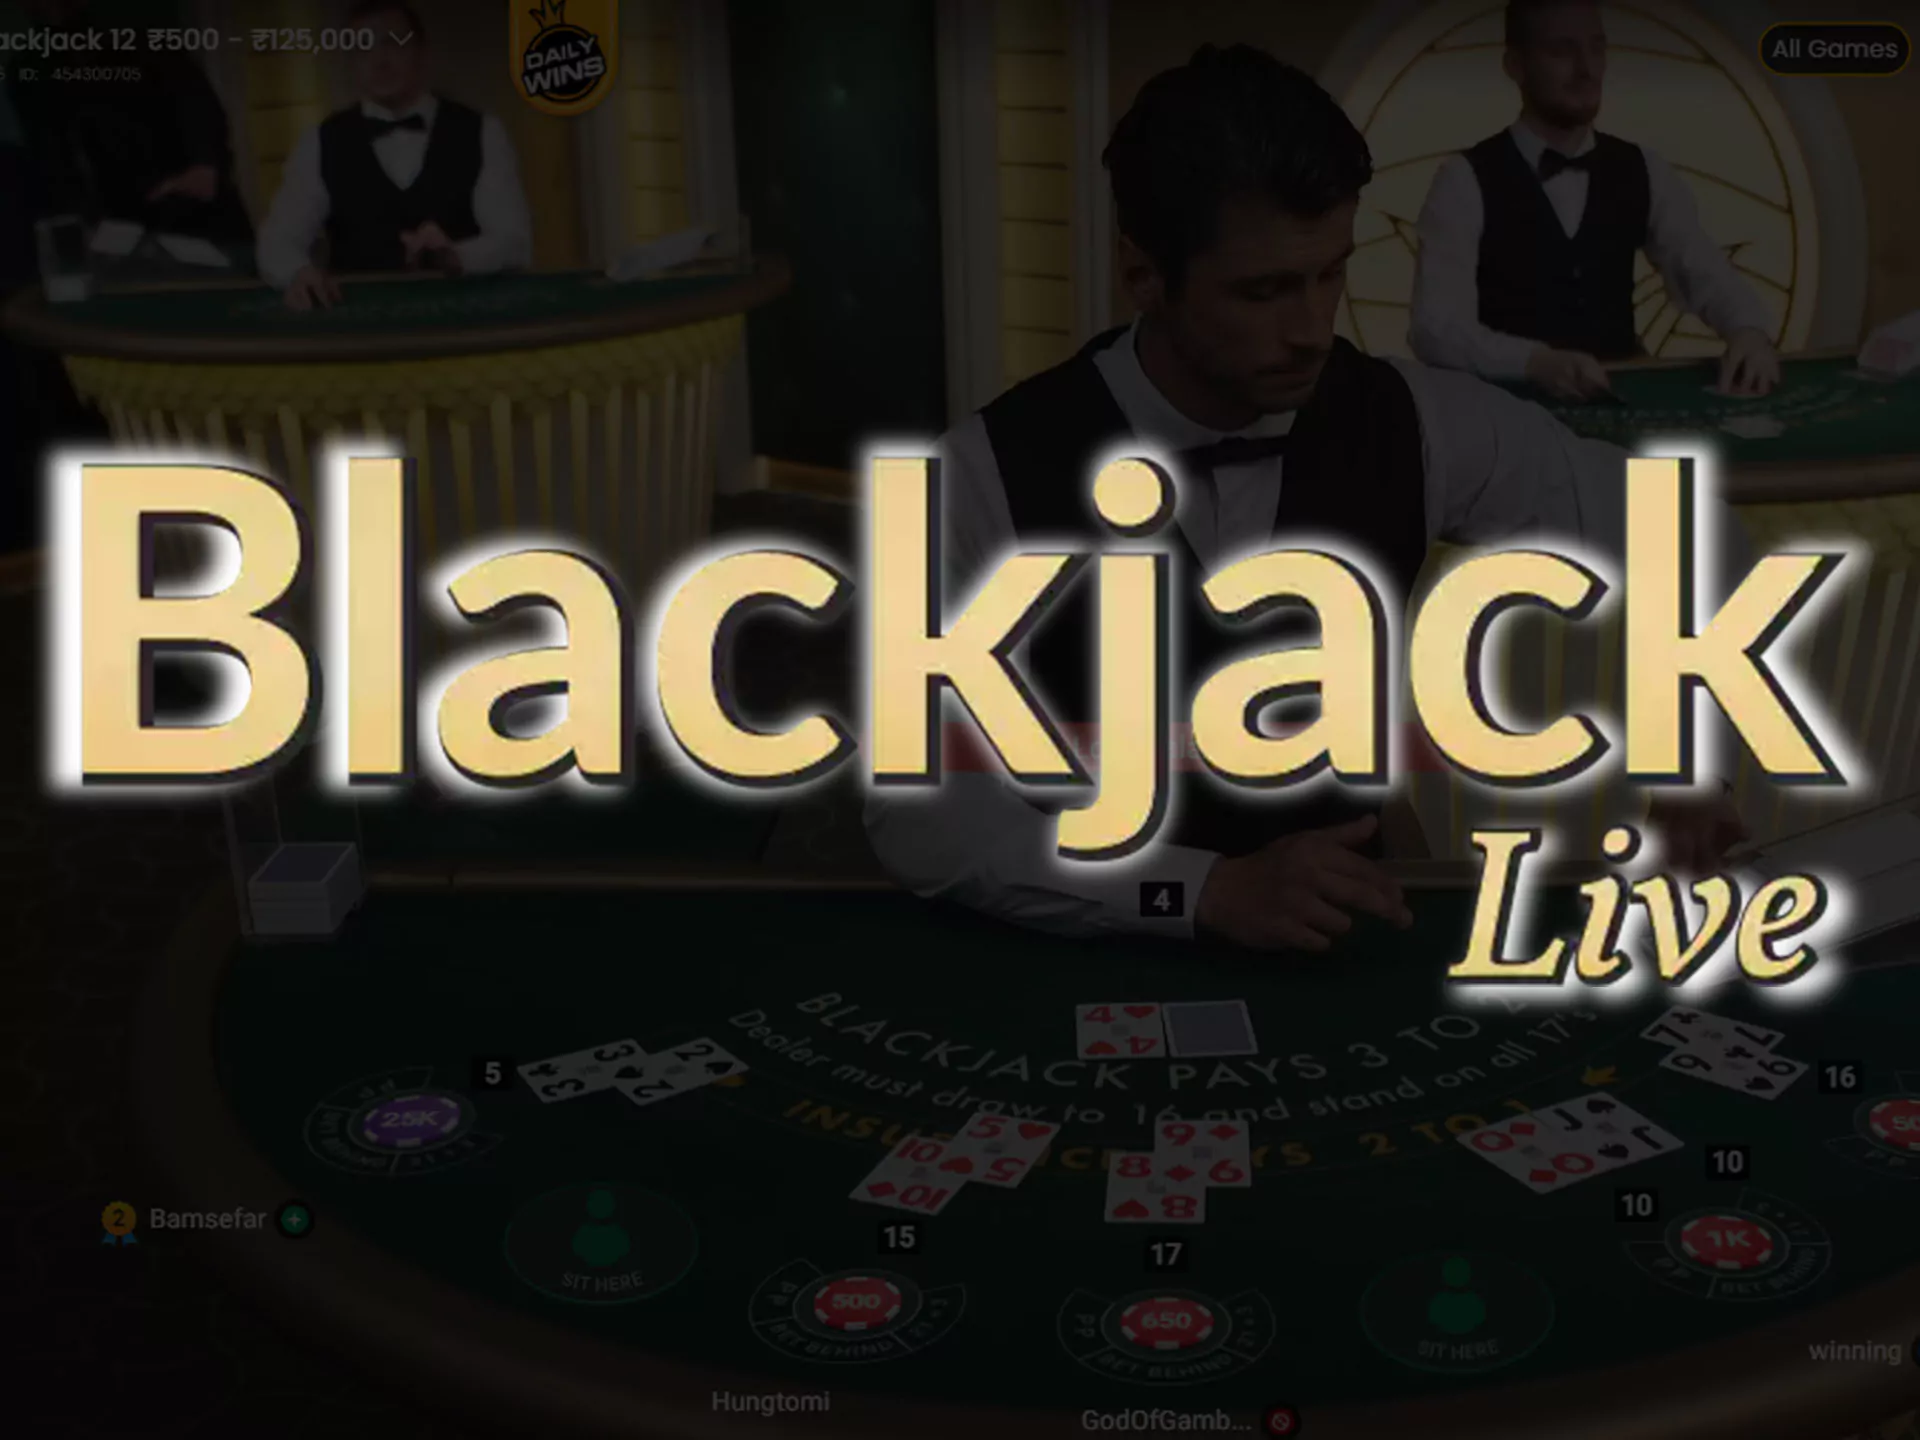 10Cric casino supports the game Live Blackjack.